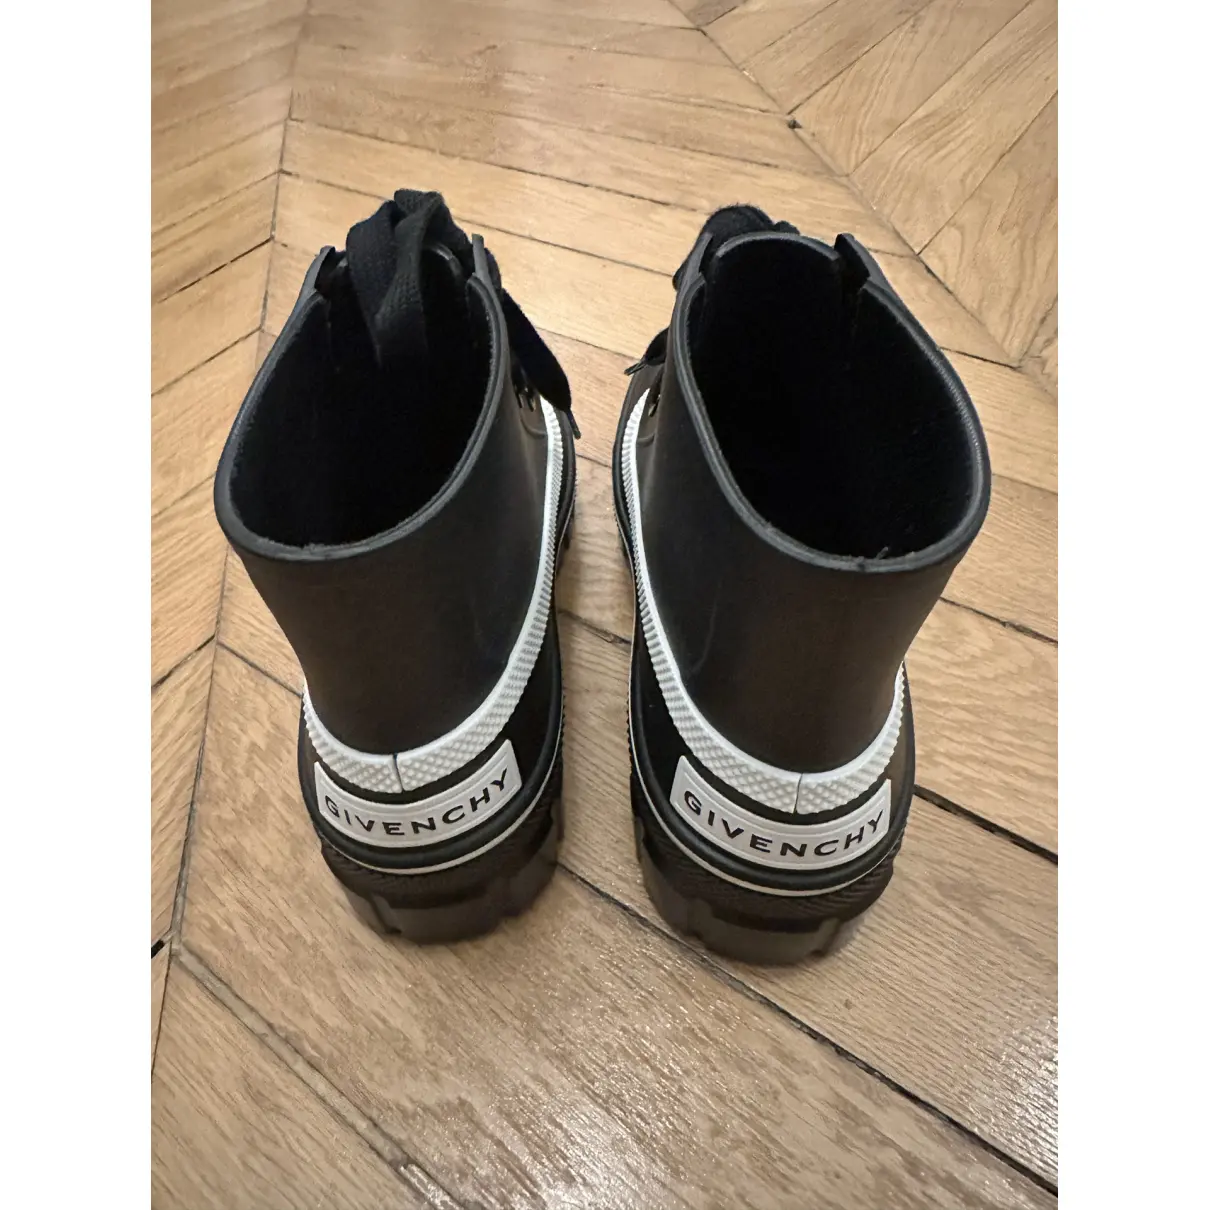 Buy Givenchy Shark boots online